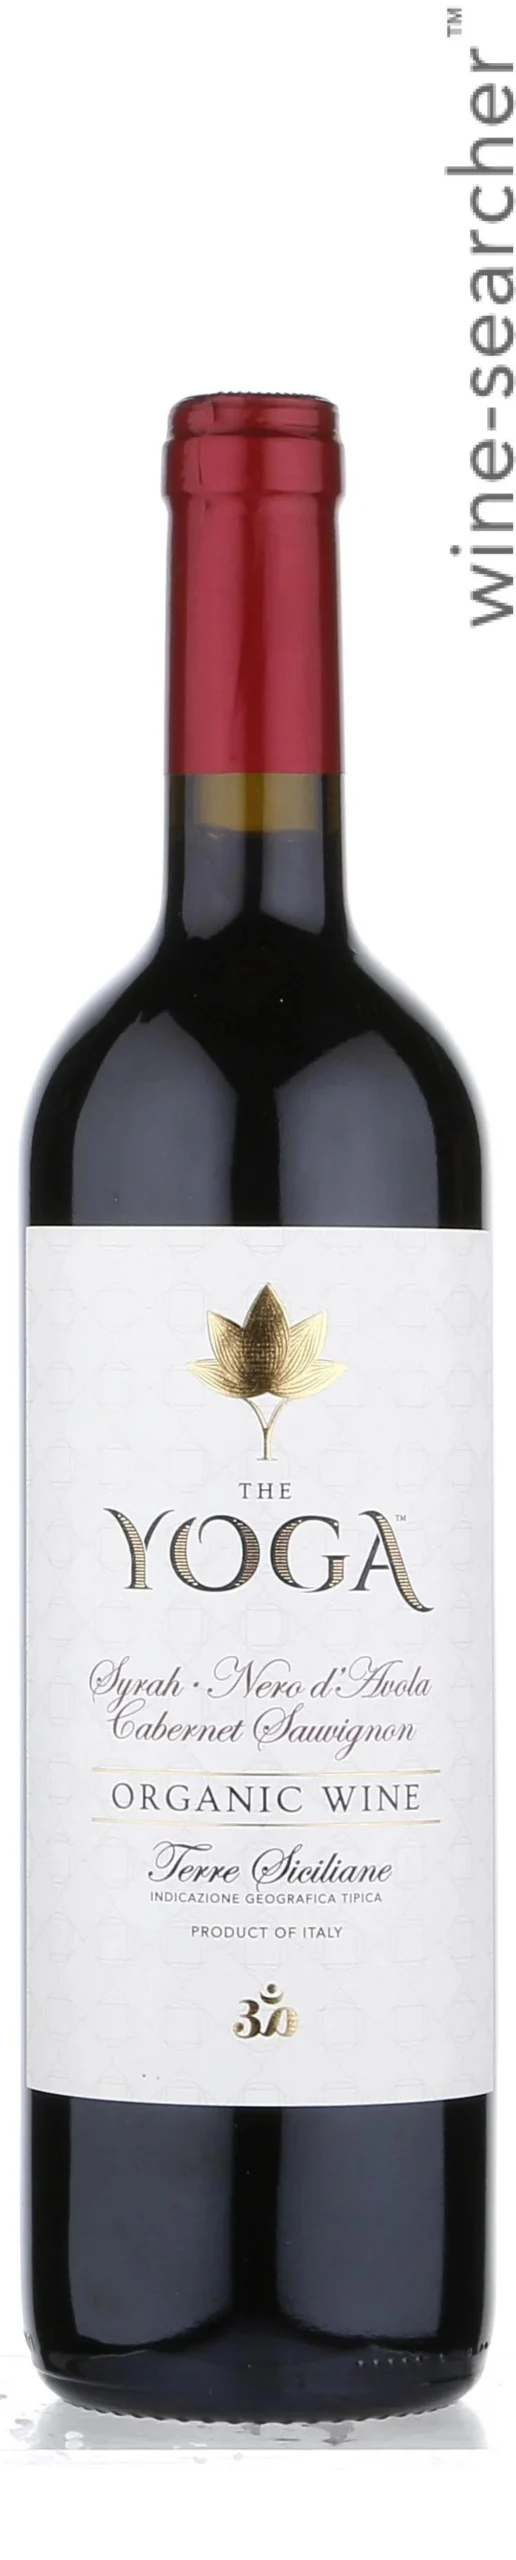 yoga wine price - Where is yoga wine from